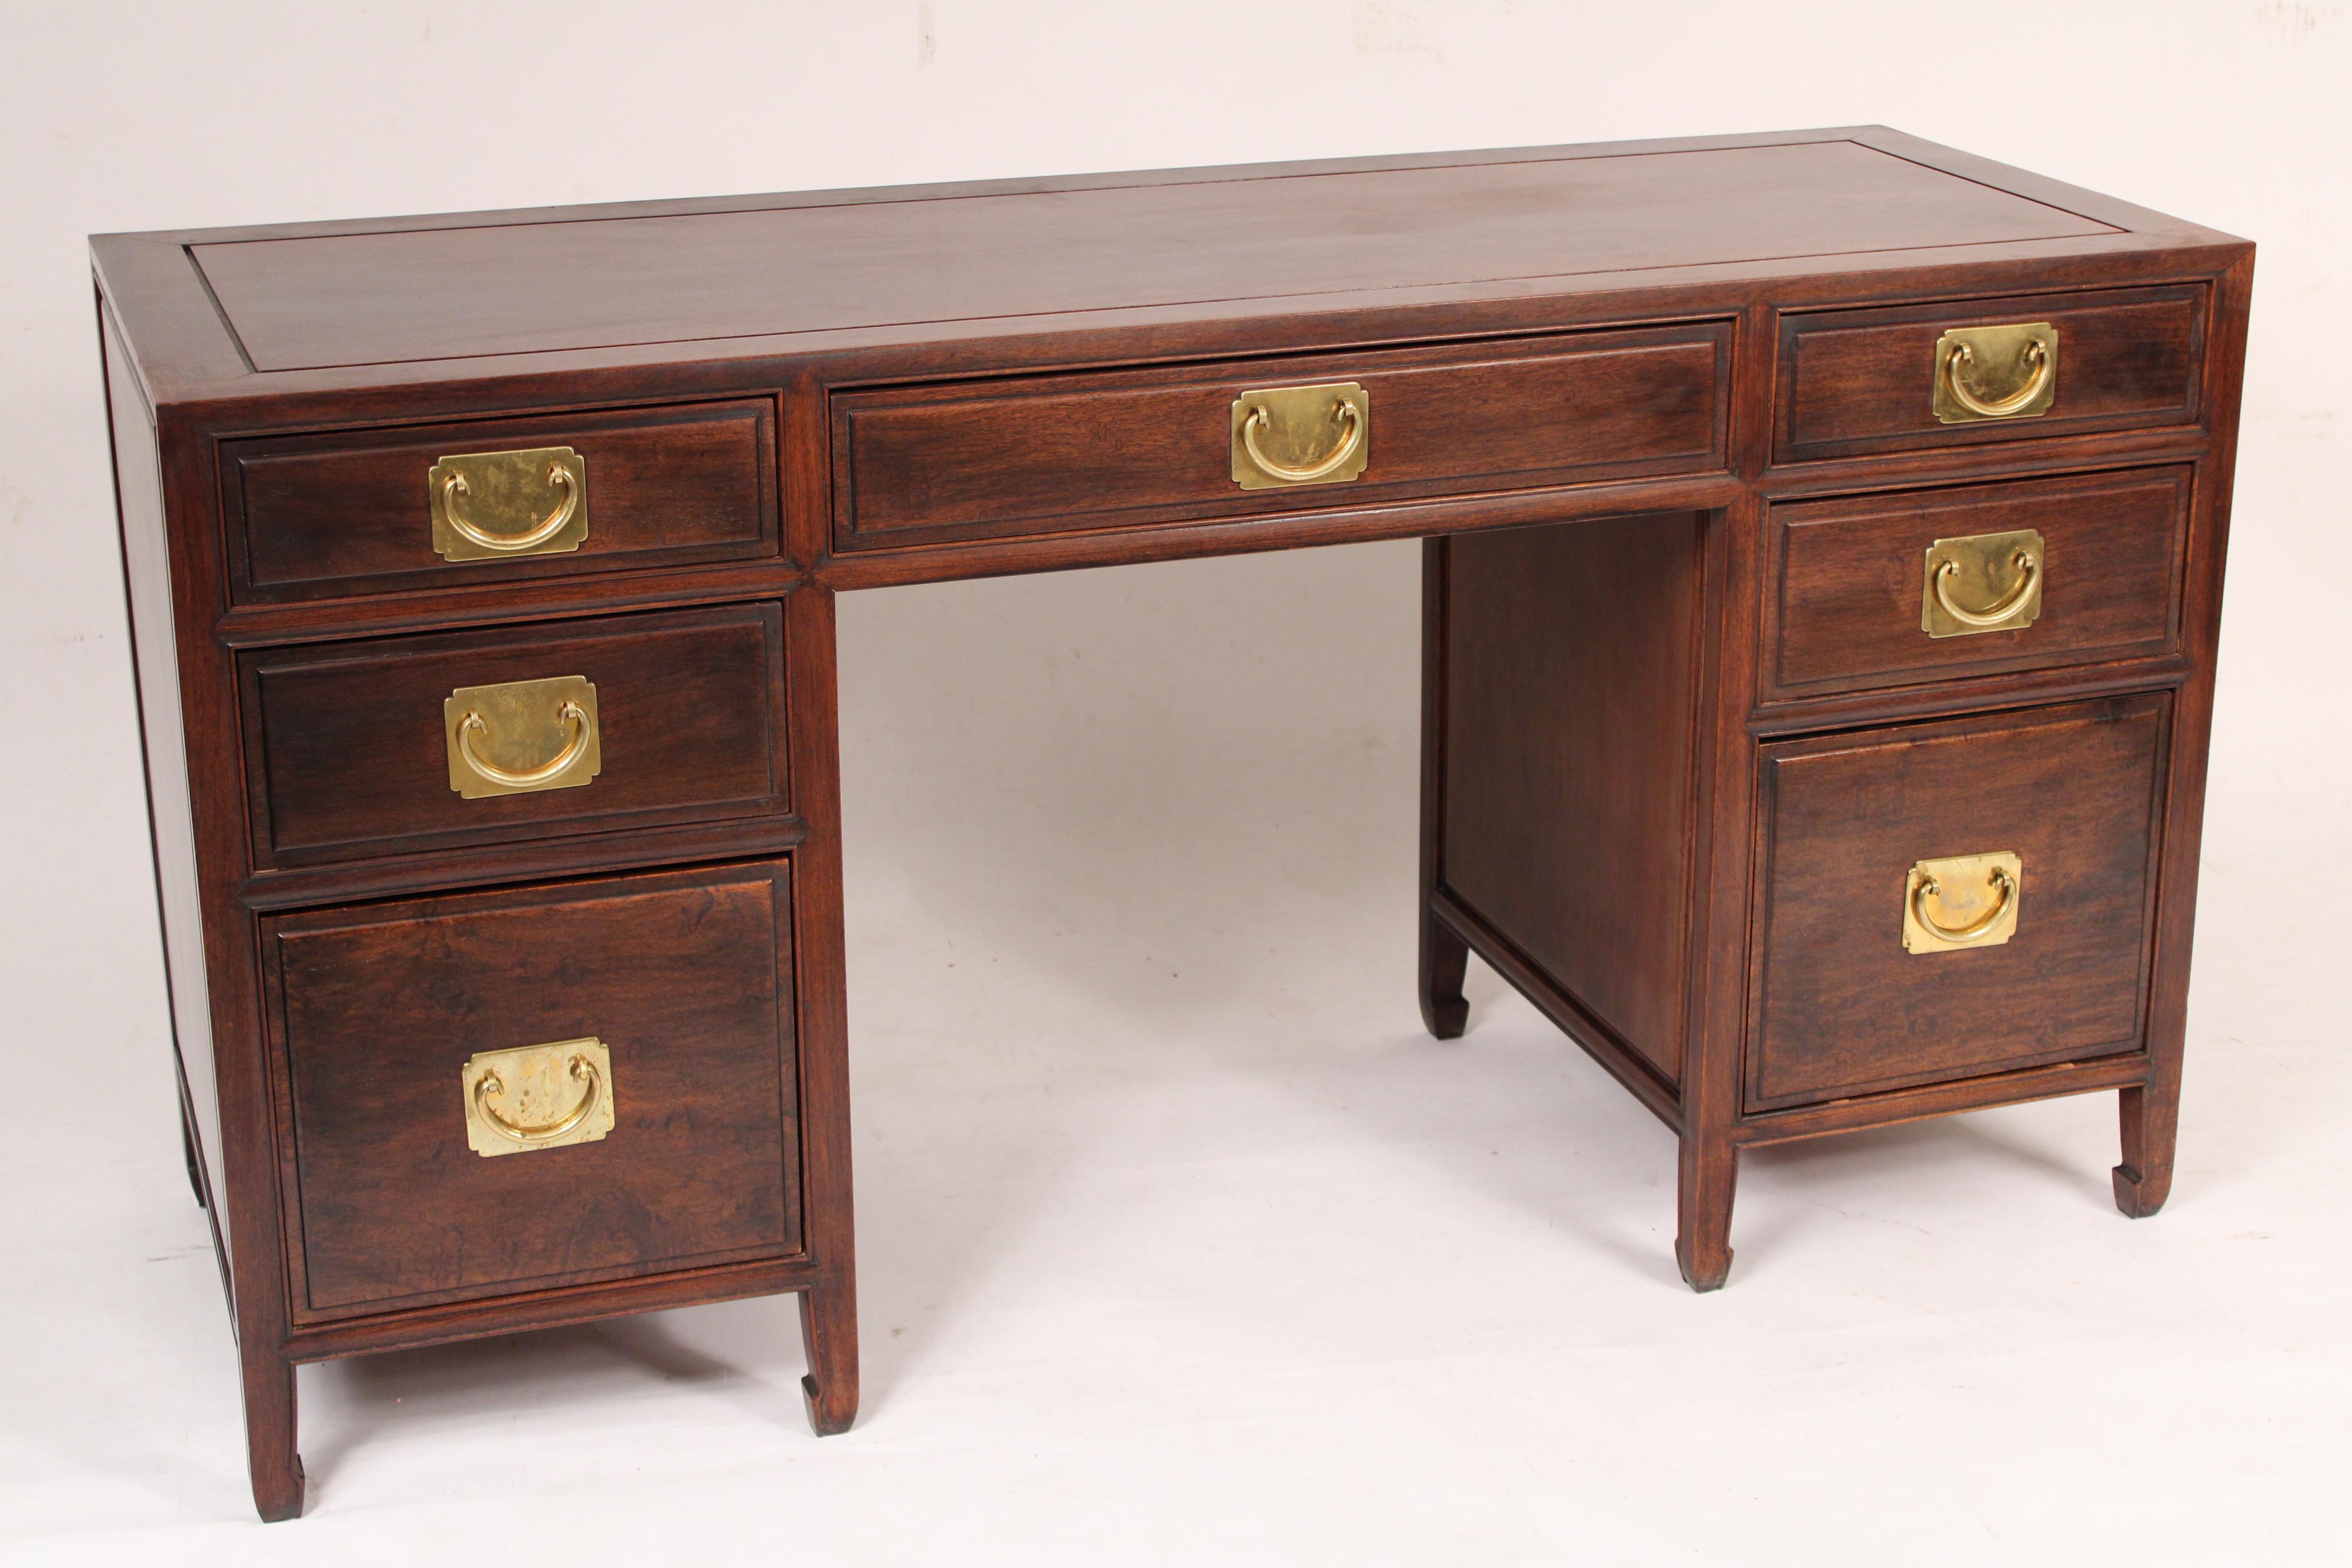 Chinese Export Chinese Teak Wood Double Pedestal Desk